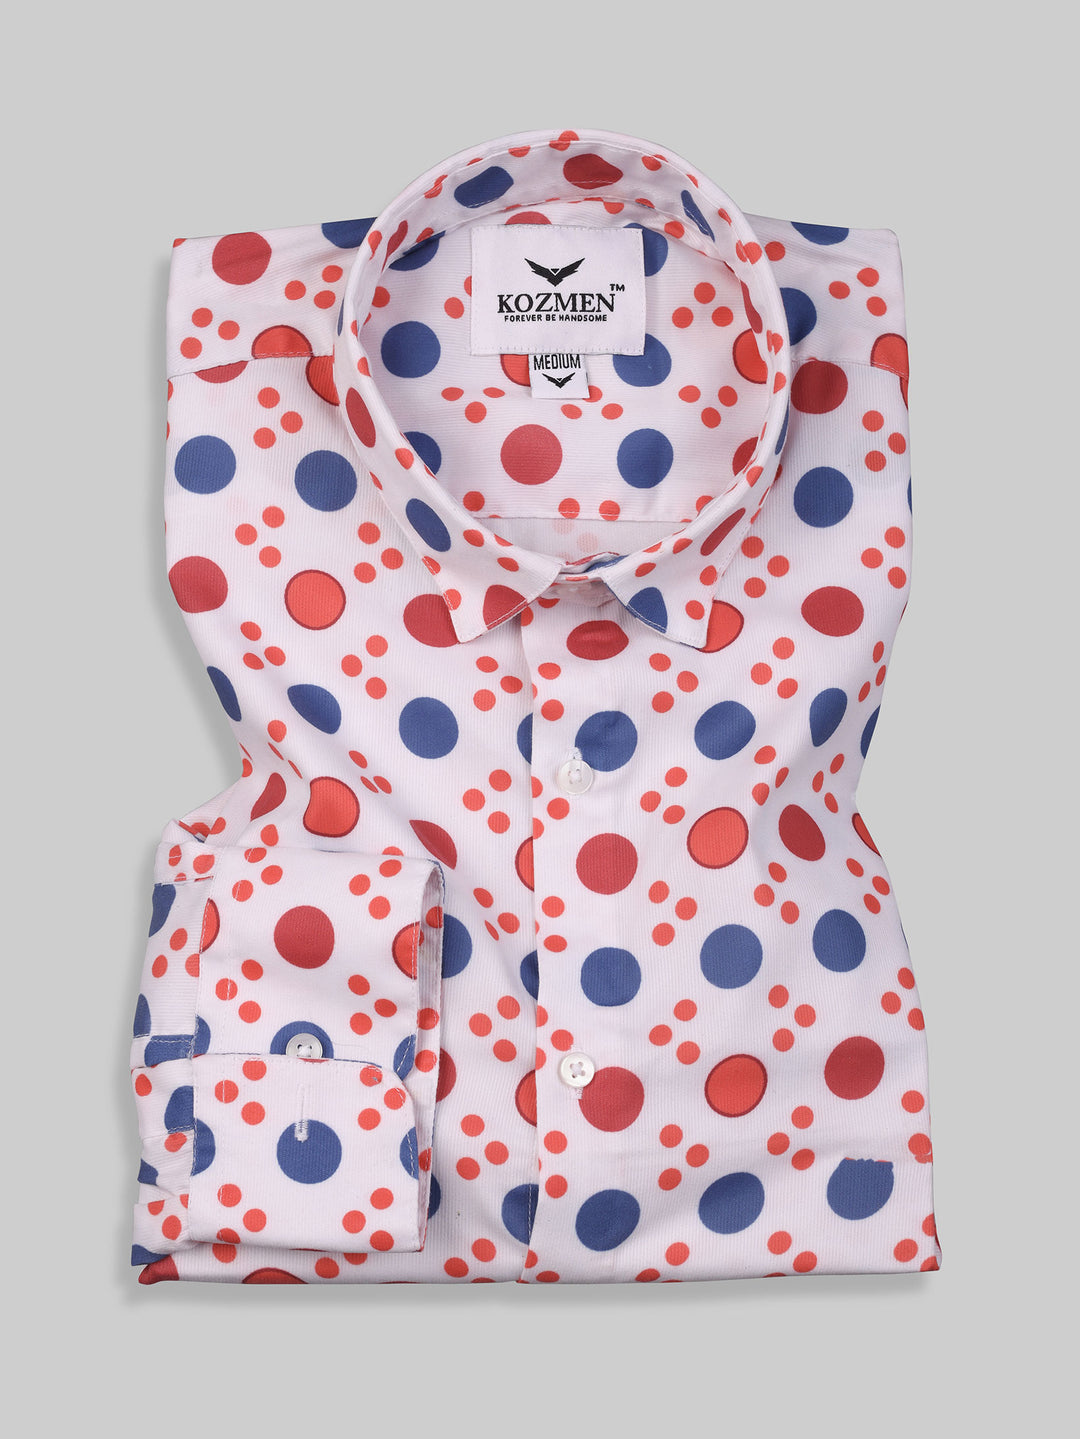 White Polka Dot Shirt with Red, Orange, and Blue Accents Shirt for men